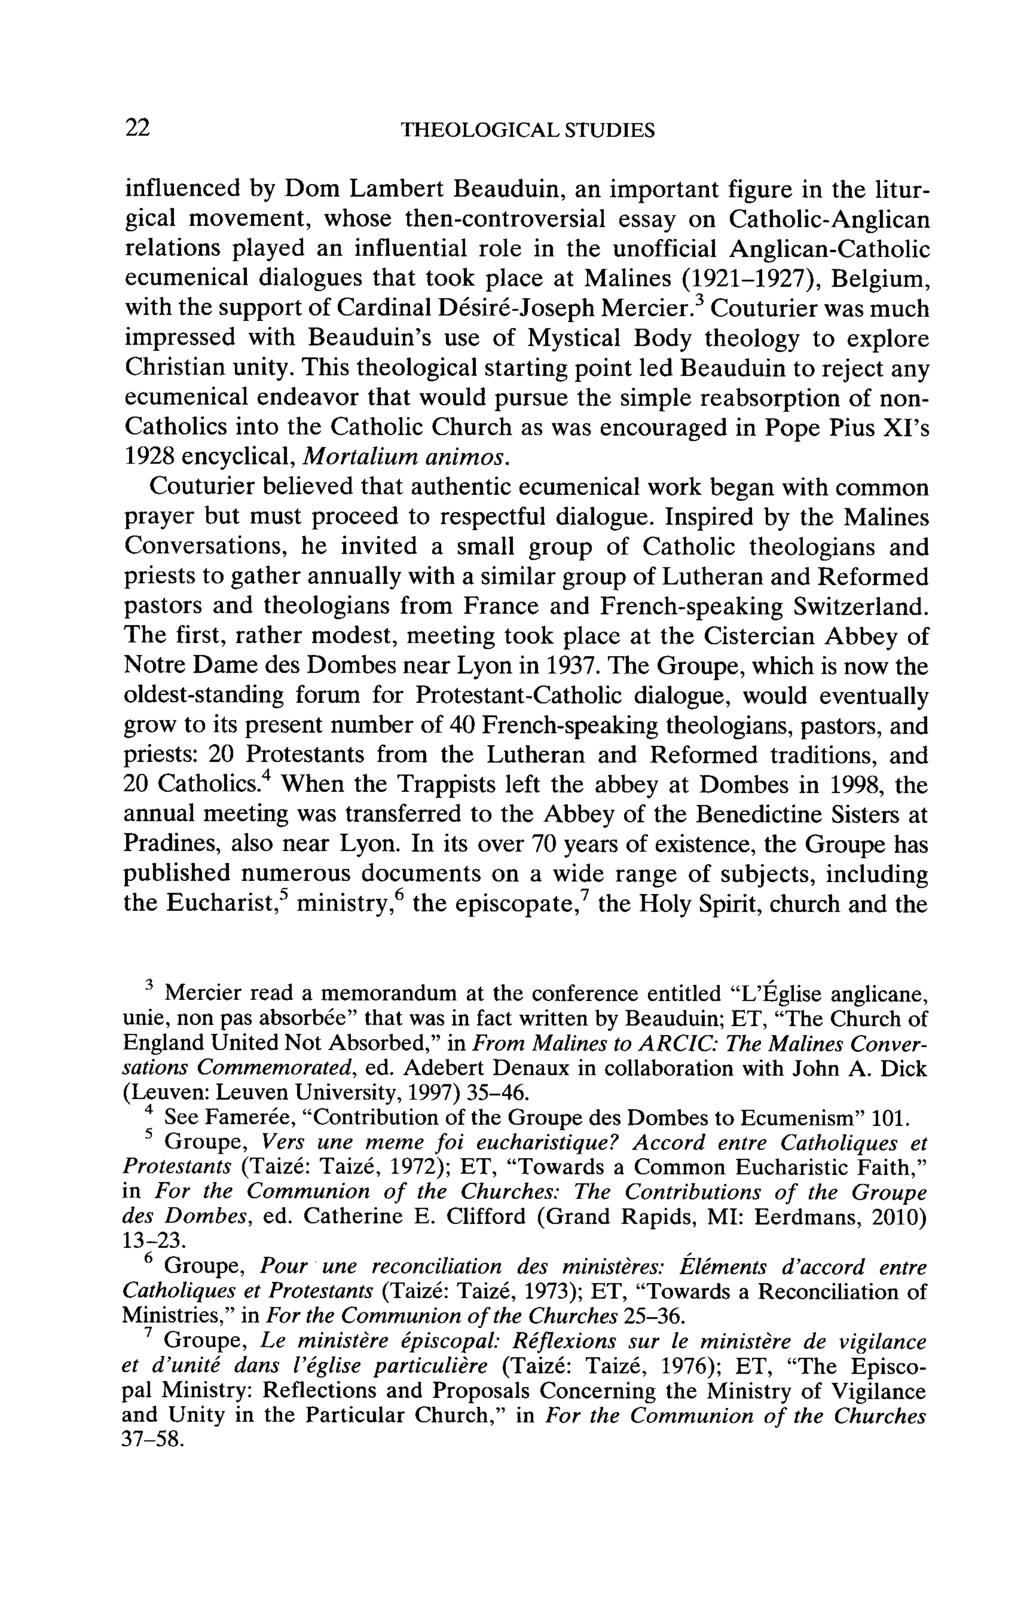 22 THEOLOGICAL STUDIES -influenced by Dom Lambert Beauduin, an important figure in the litur gical movement, whose then-controversial essay on Catholic-Anglican relations played an influential role